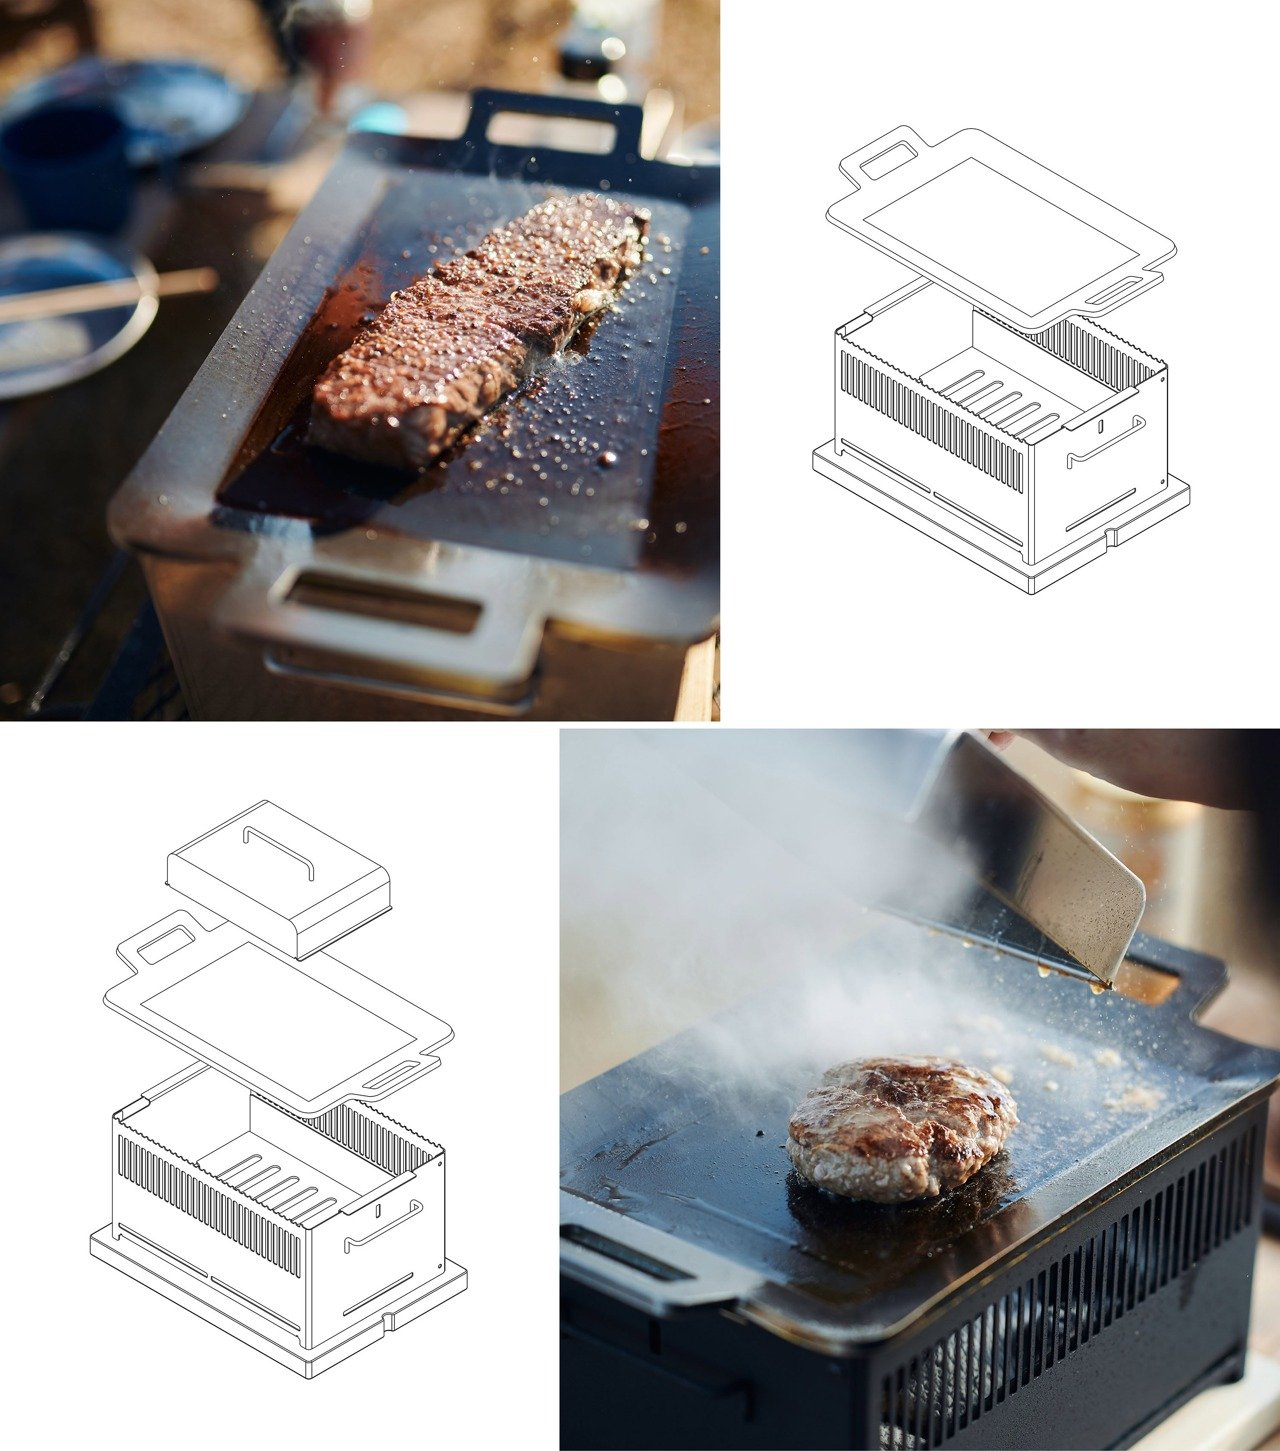 https://www.yankodesign.com/images/design_news/2022/08/this-tiny-modular-tabletop-griller-lets-you-cook-in-7-different-ways-making-outdoor-cooking-fun-again/all-in-one-grill_2.jpg